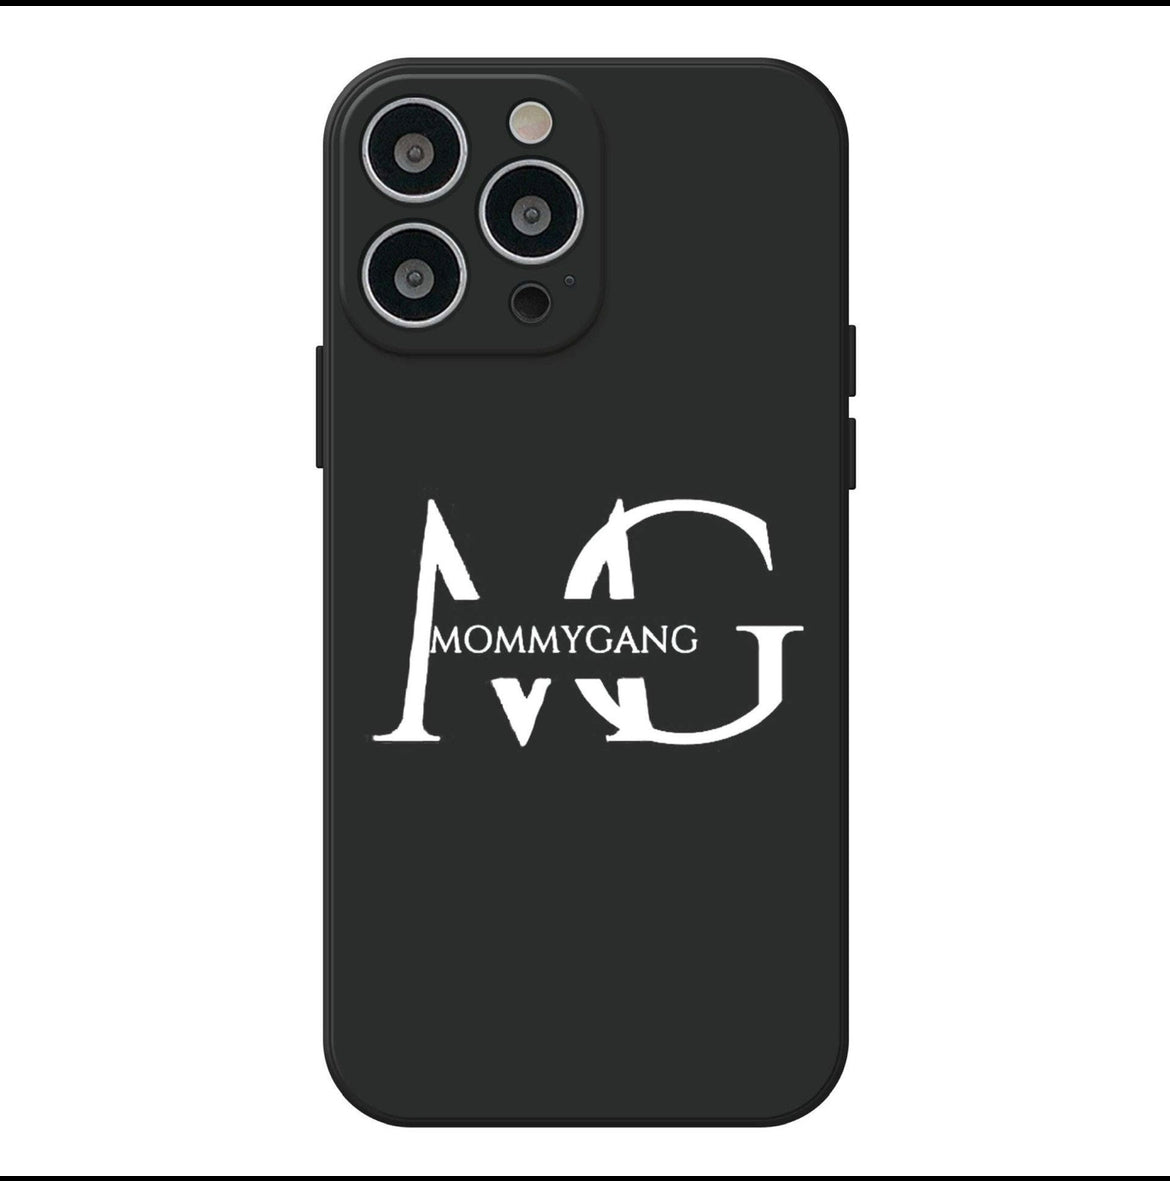 MommyGang iPhone Case